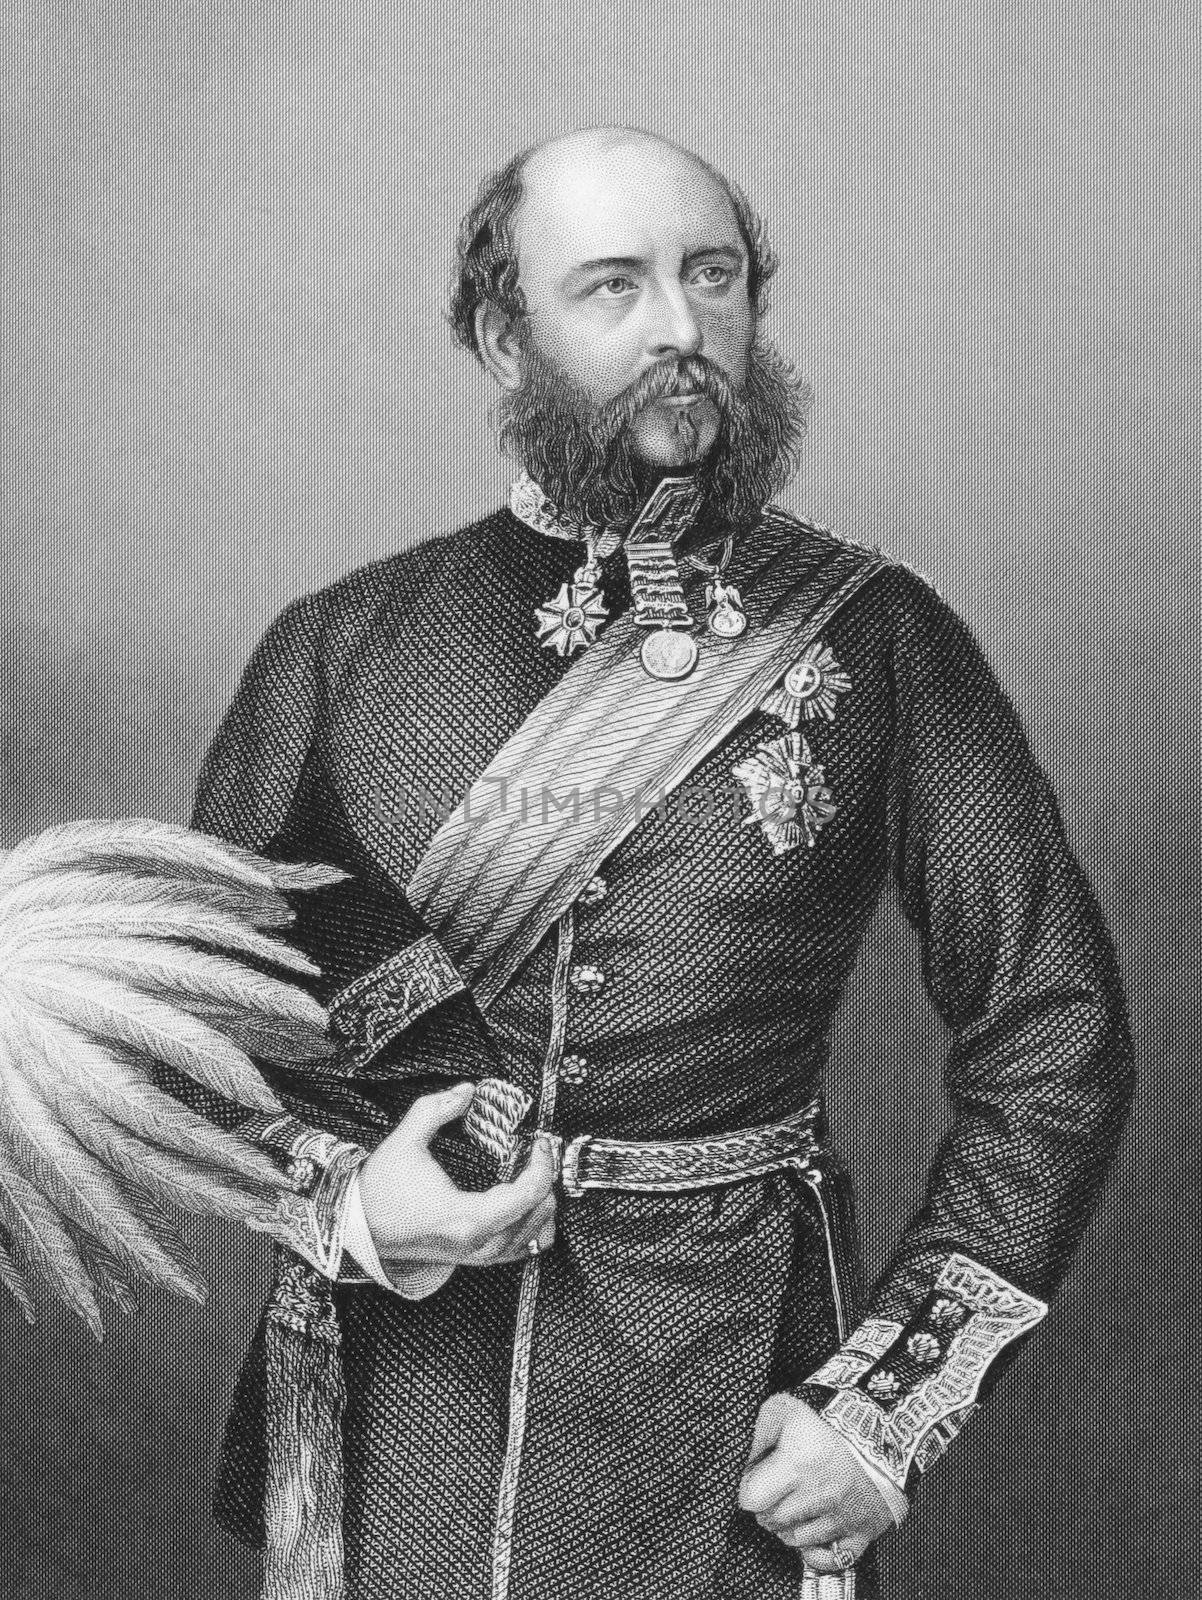 Prince George, Duke of Cambridge (1819-1904) on engraving from the 1800s. Member of the British Royal Family and army officer. Engraved from a photograph by J.De Beerski.